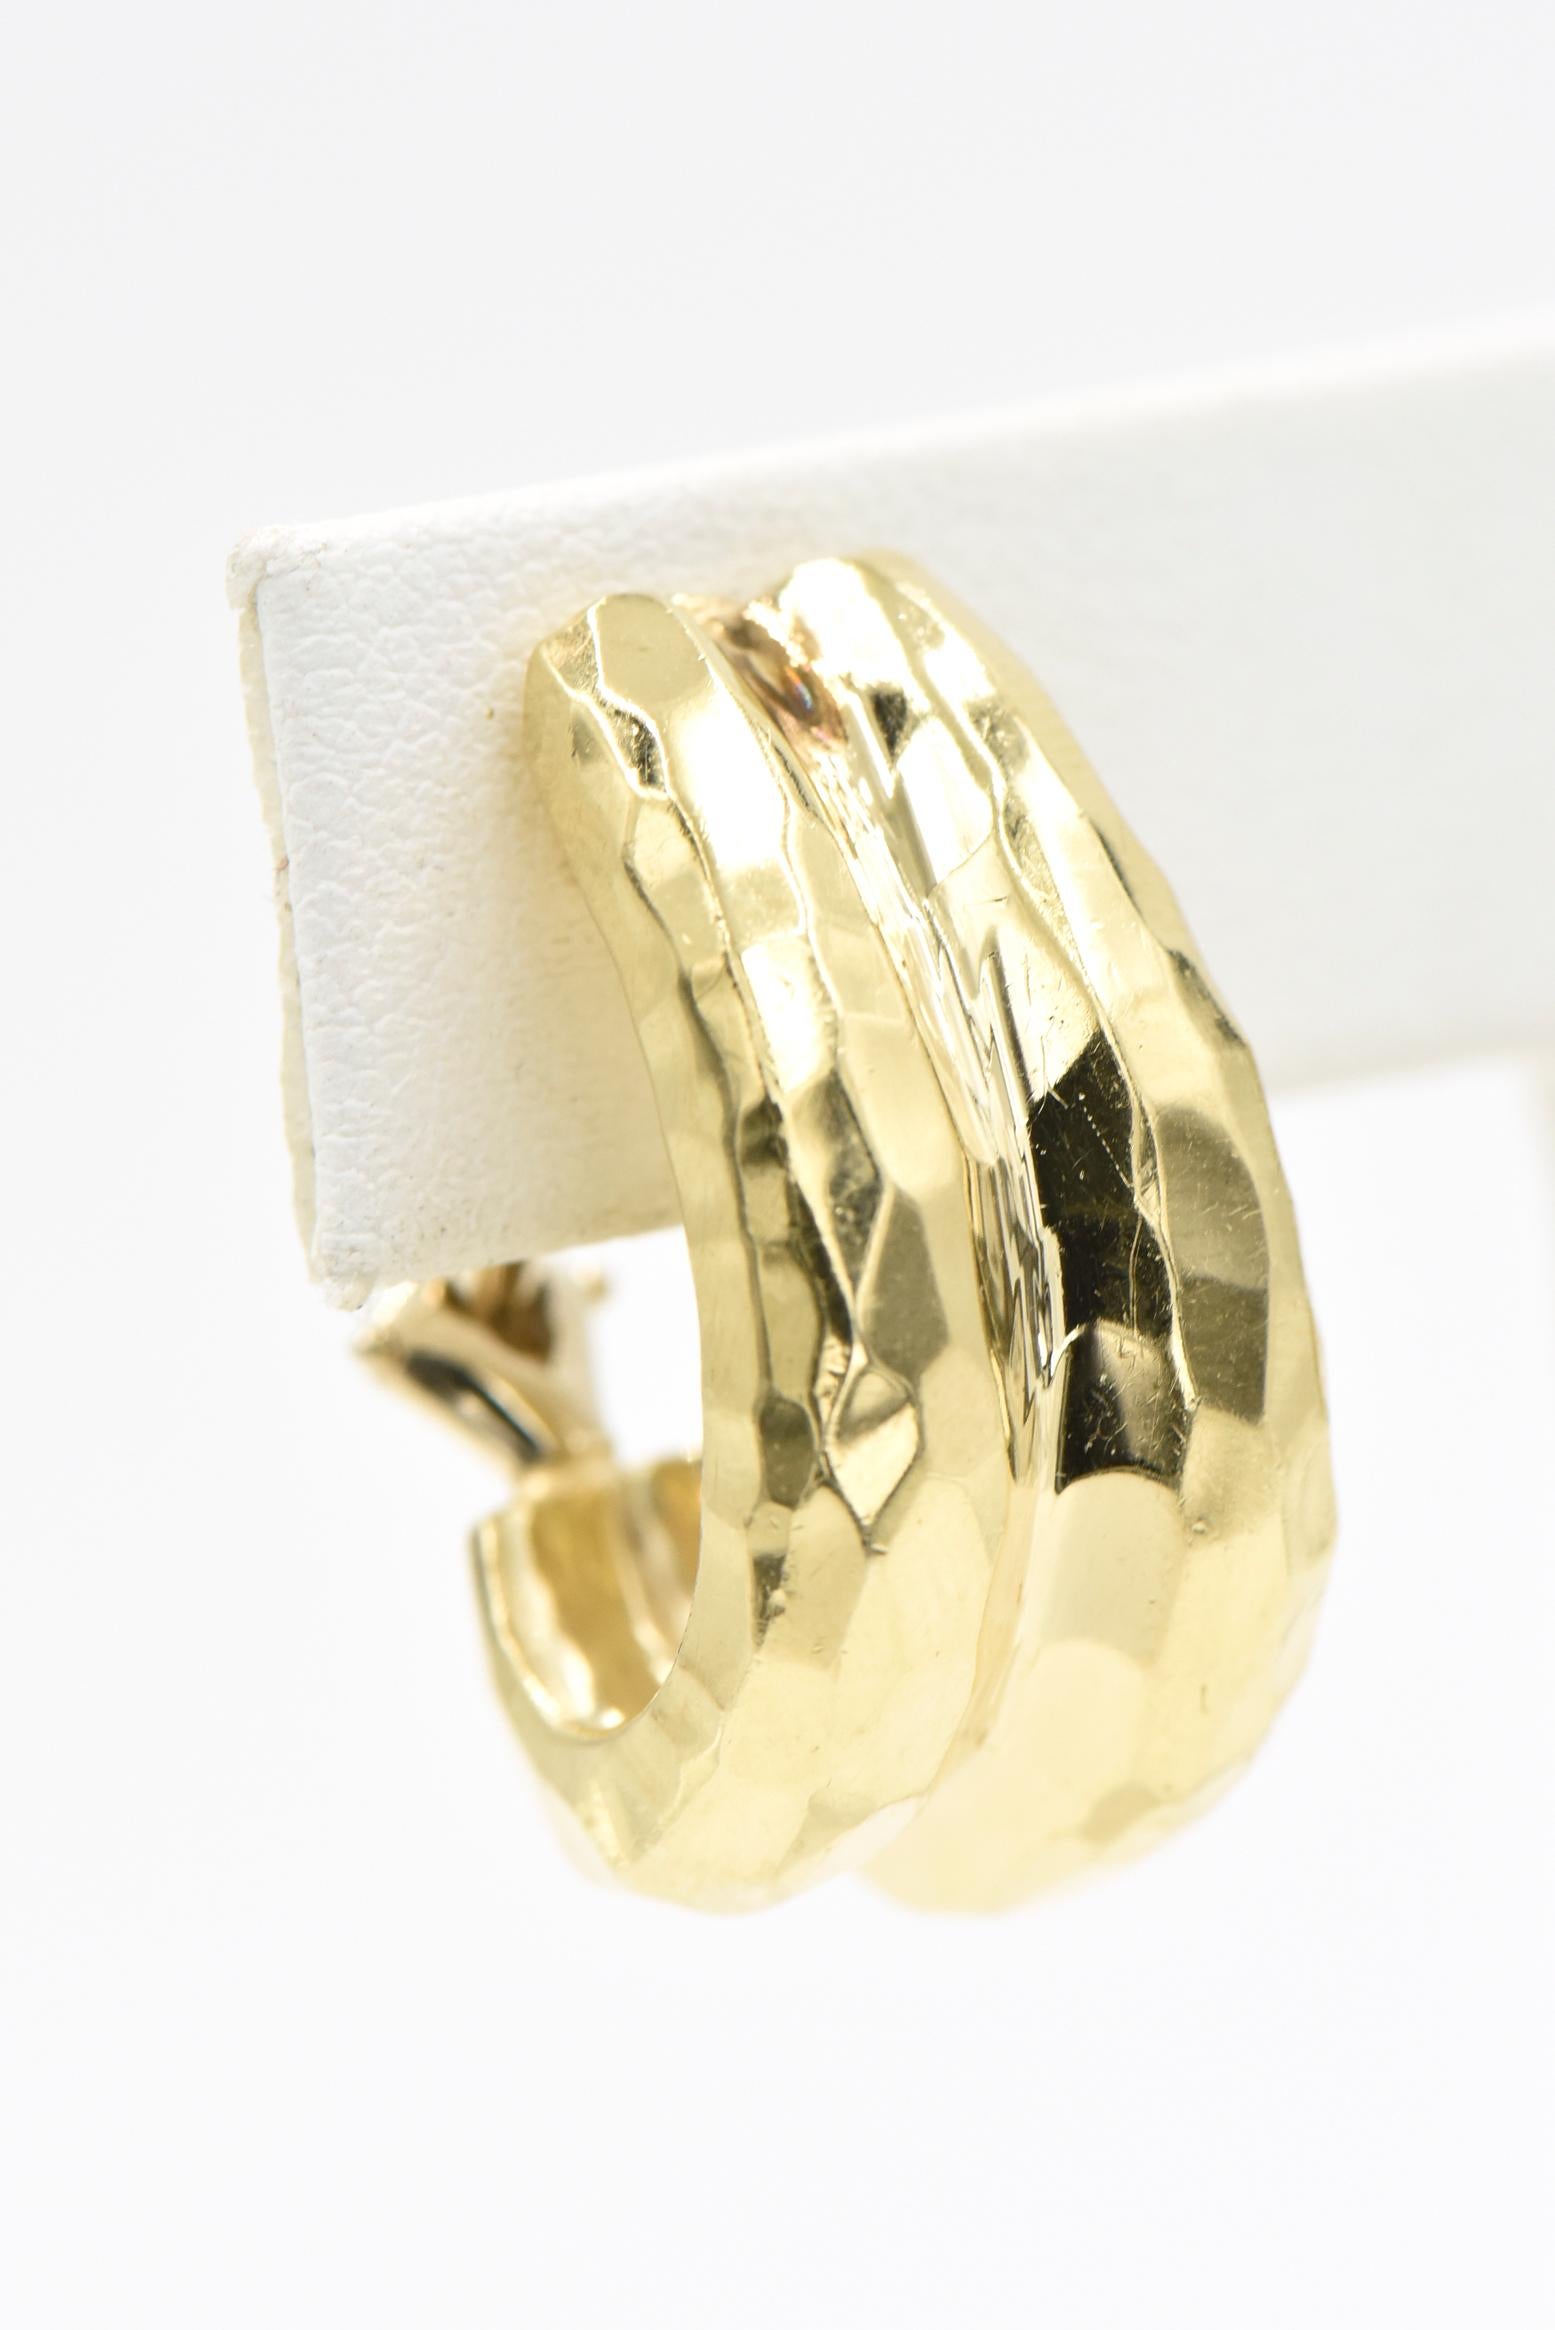 Stylized double wide three dimensional hammered to look like facets 14k yellow gold hoop earrings by Rotkel.  Hinged back clip ons with NO post.

Signed Rotkel 14k